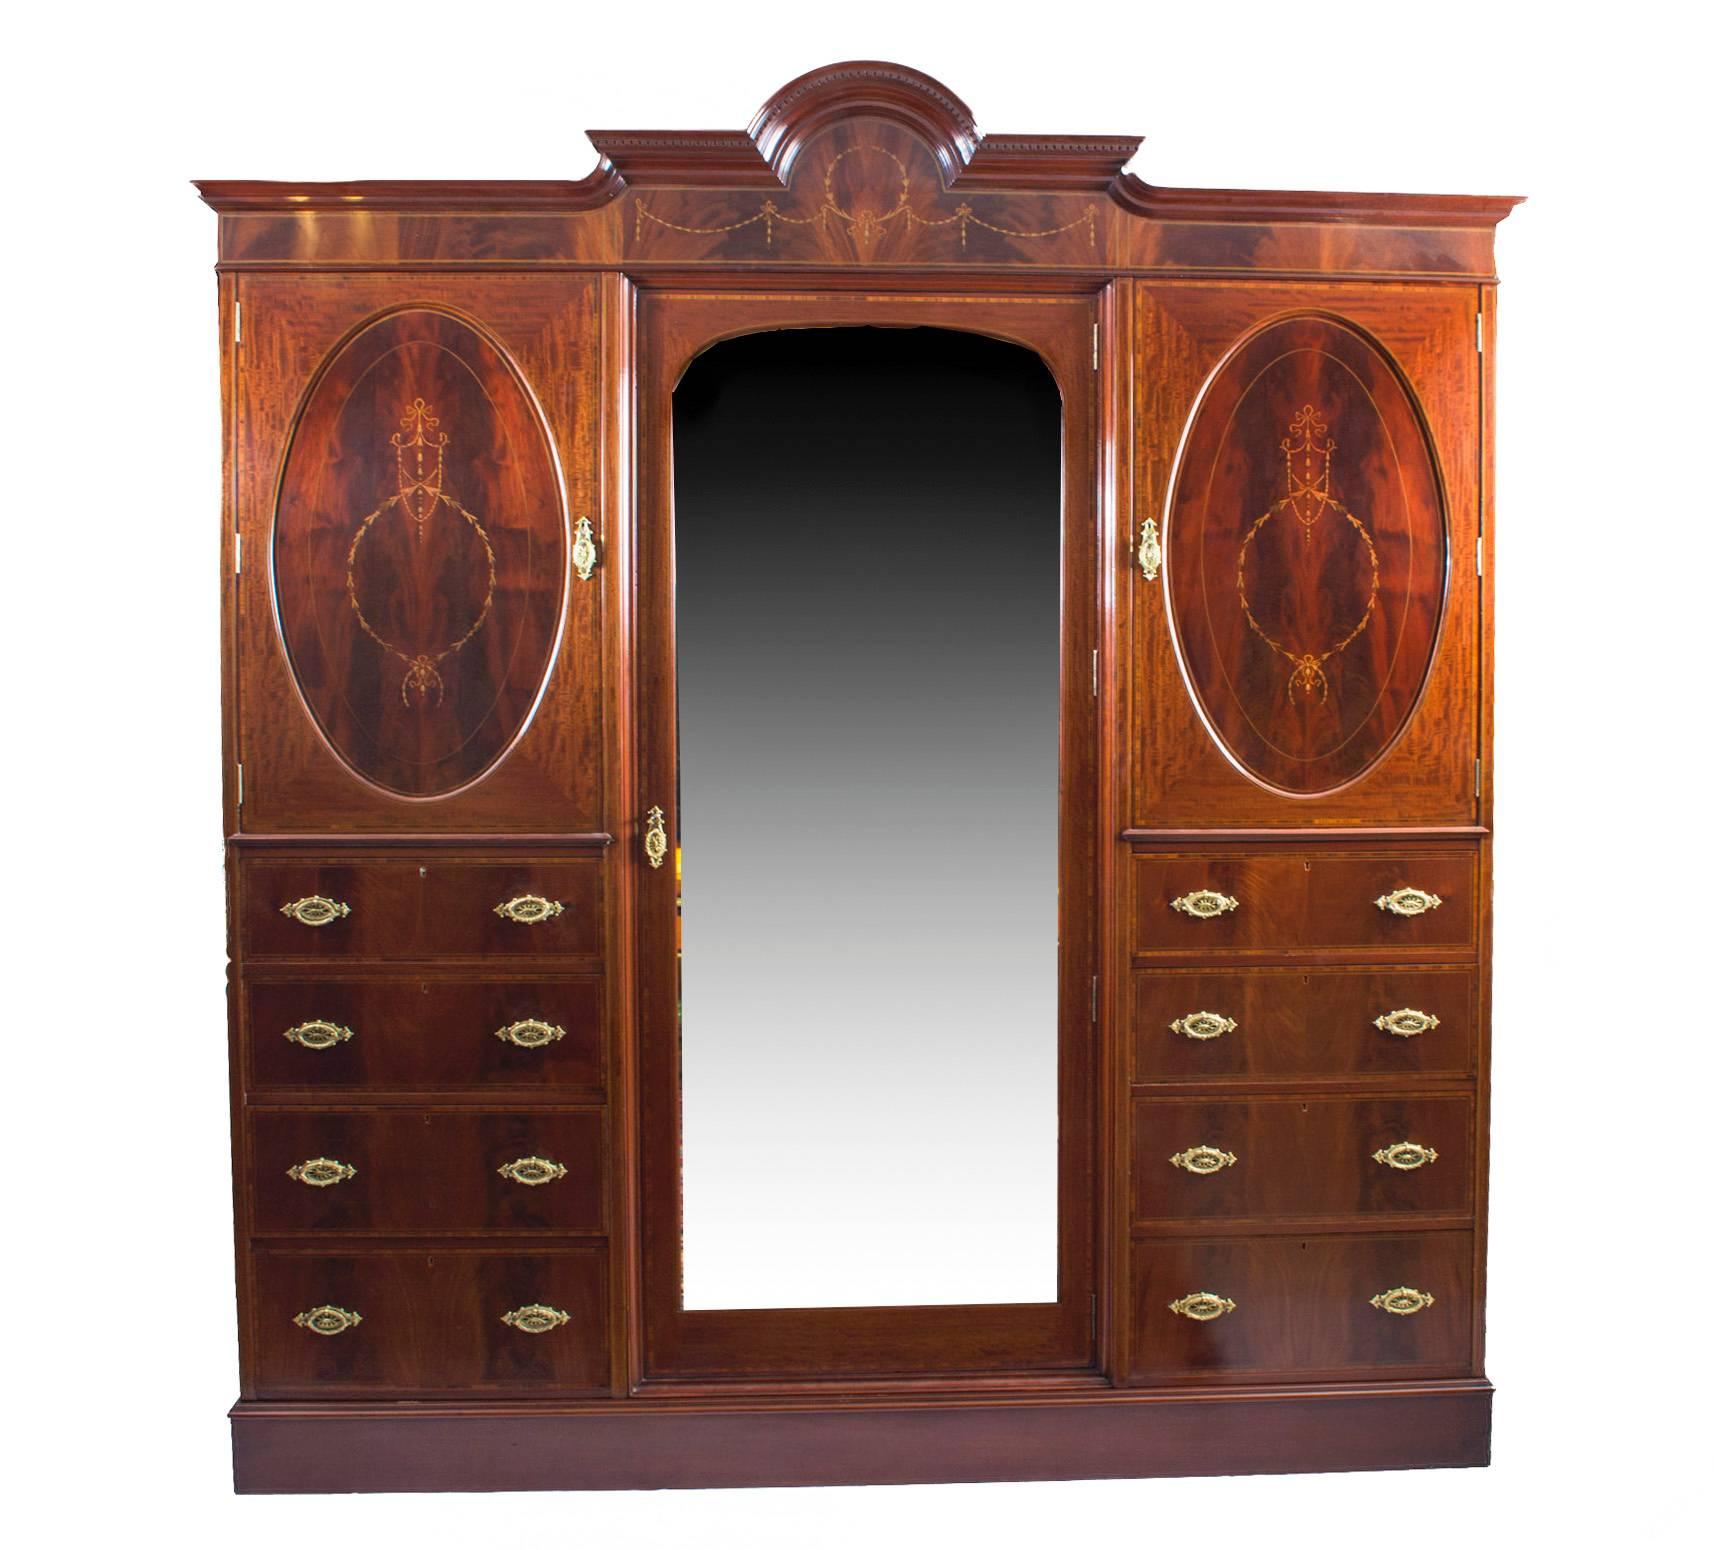 This is a lovely antique English inlaid flame mahogany triple wardrobe, circa 1880 in date.

It has been accomplished in the most beautiful 'flame mahogany' with fabulous satinwood banding and superb inlaid decoration comprising ribbon tied laurel